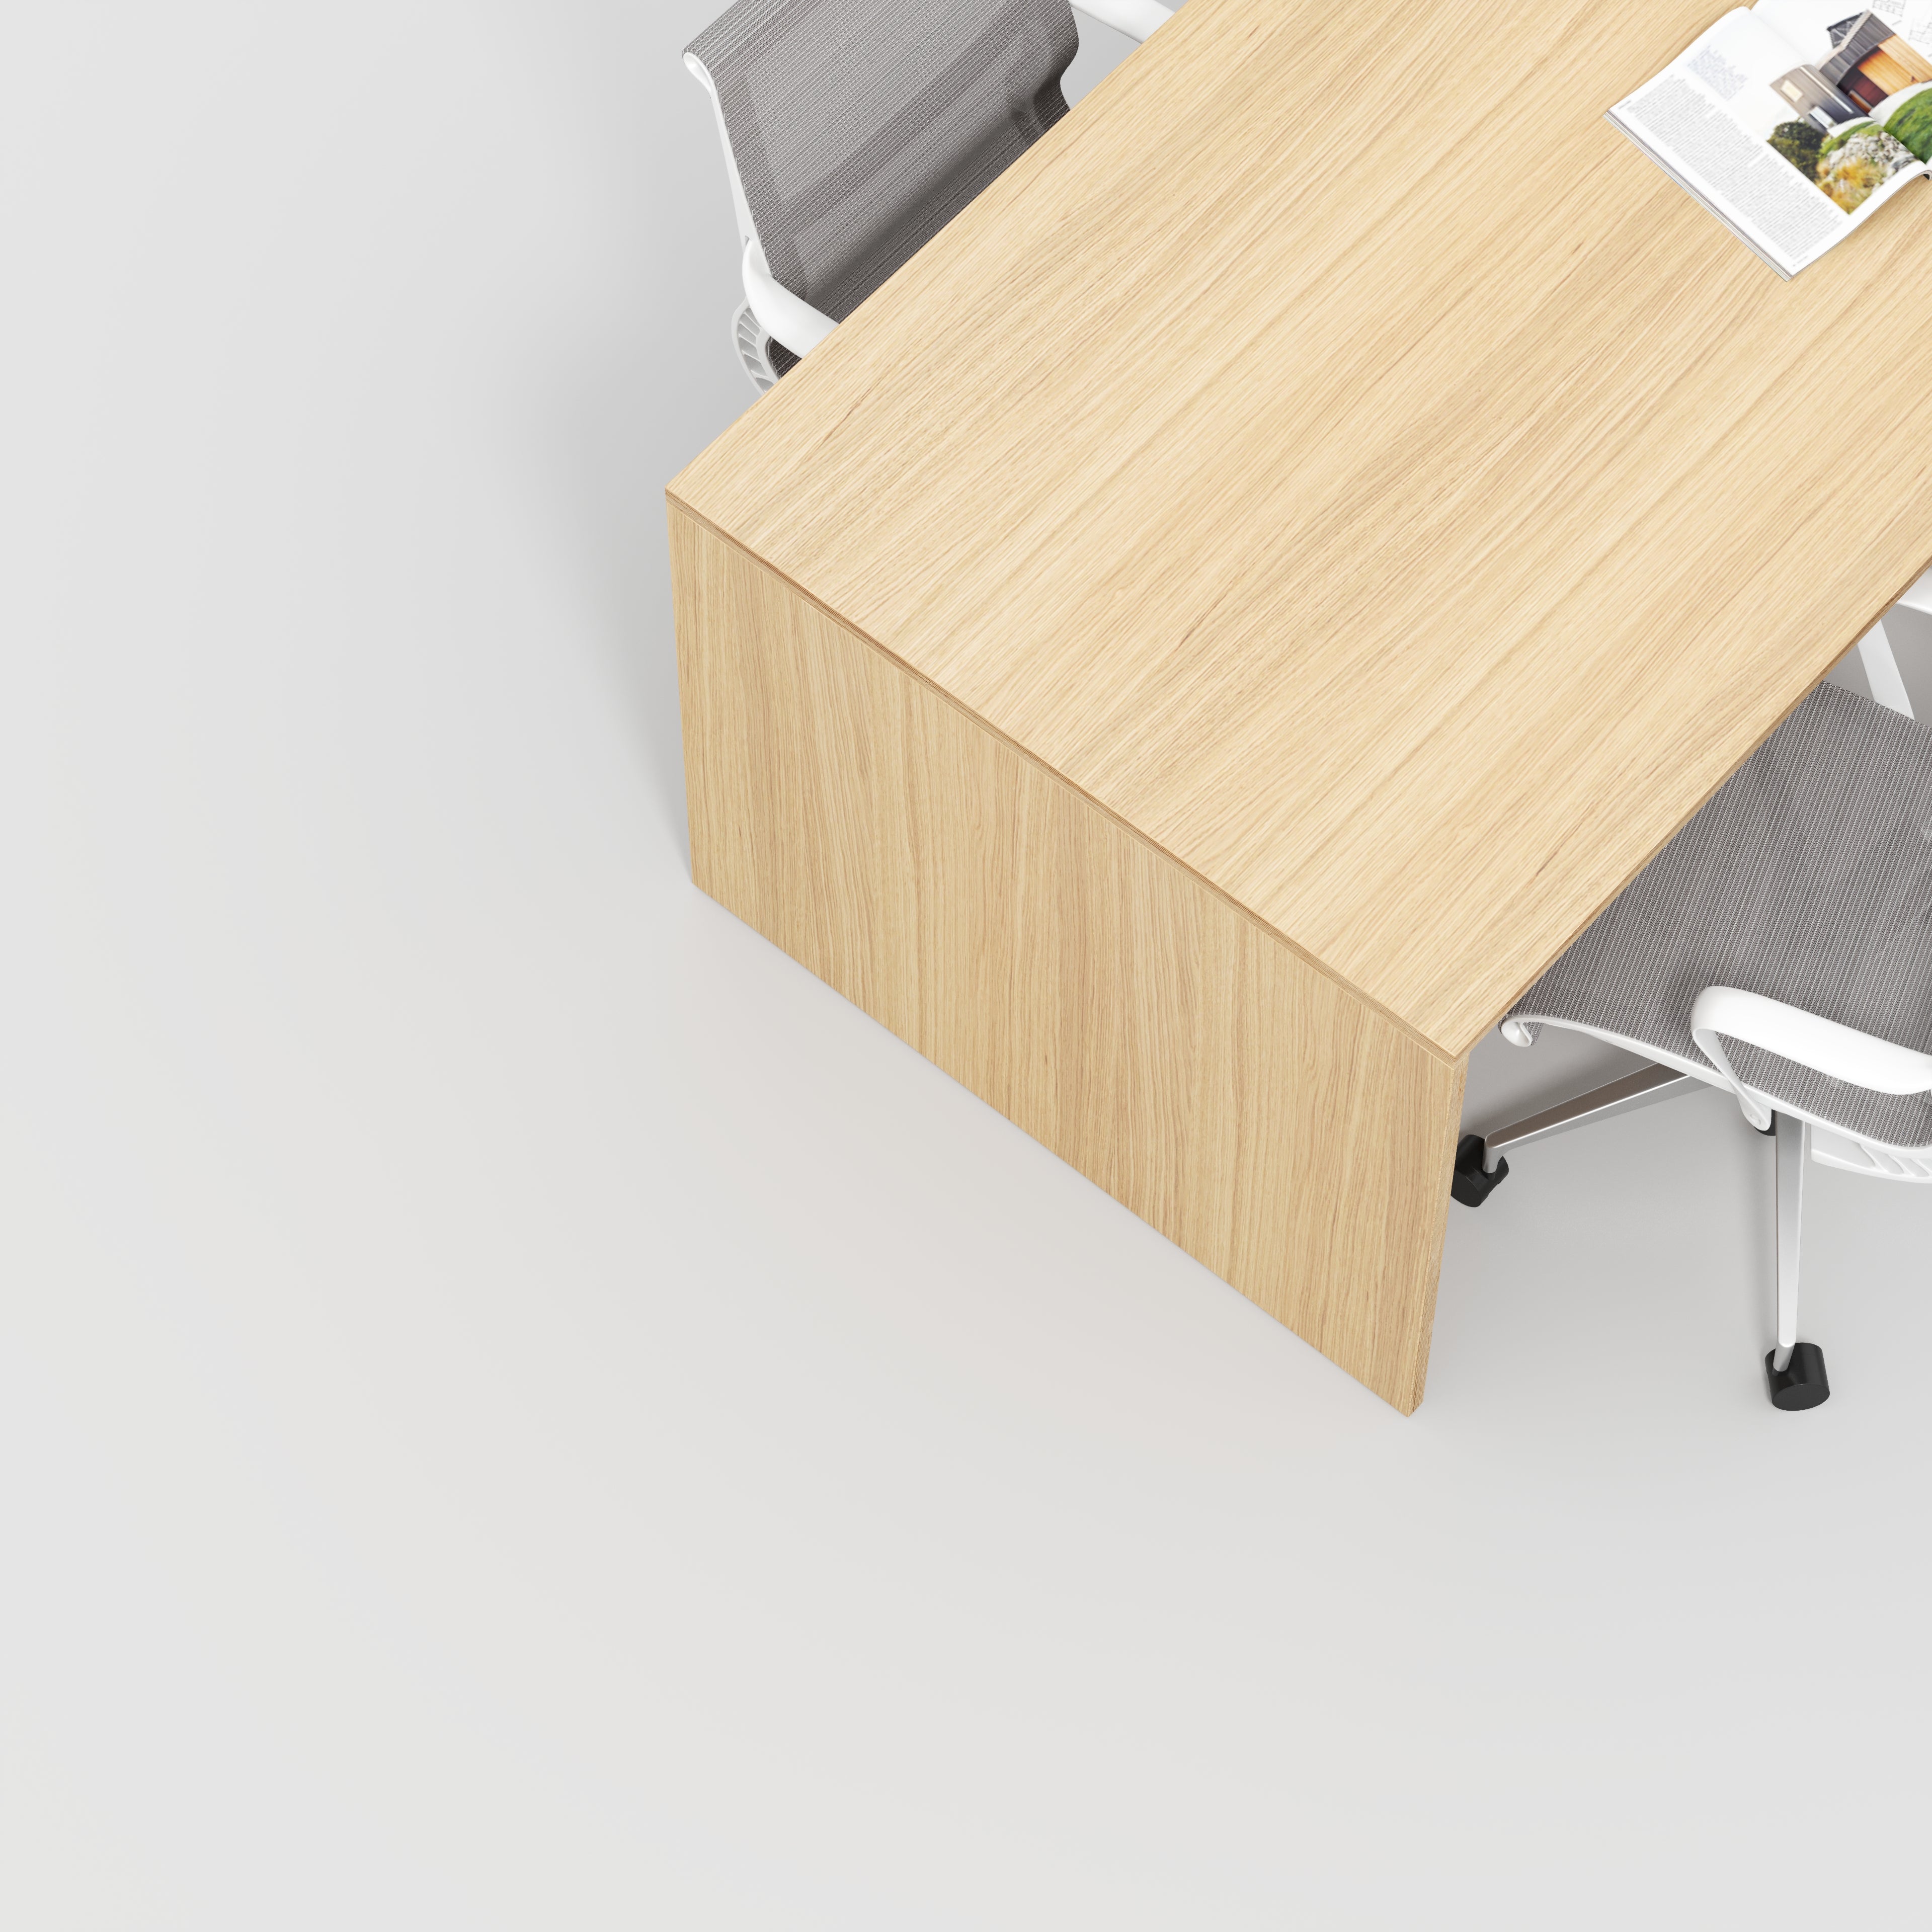 Table with Solid Sides - Plywood Oak - 2000(w) x 1000(d) x 735(h)